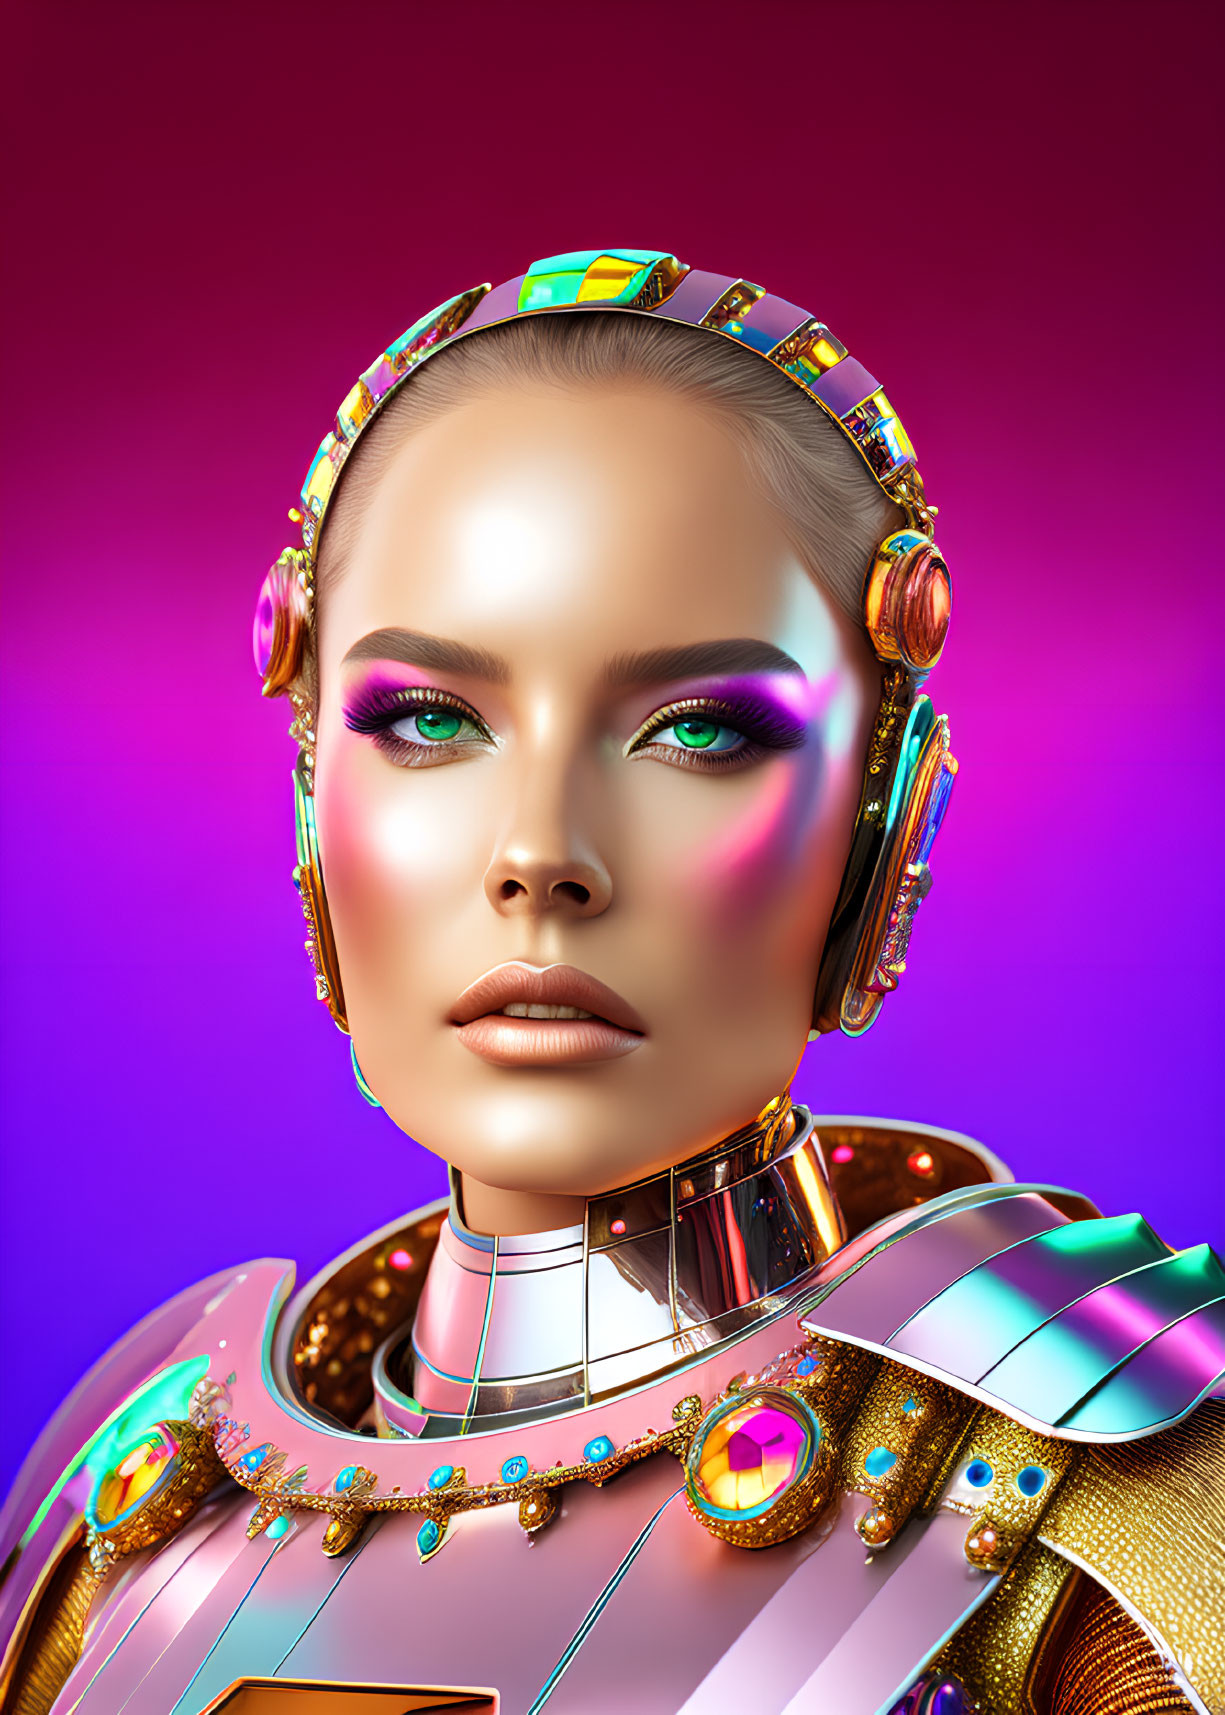 Futuristic female android with metallic complexion and gemstones on vibrant background